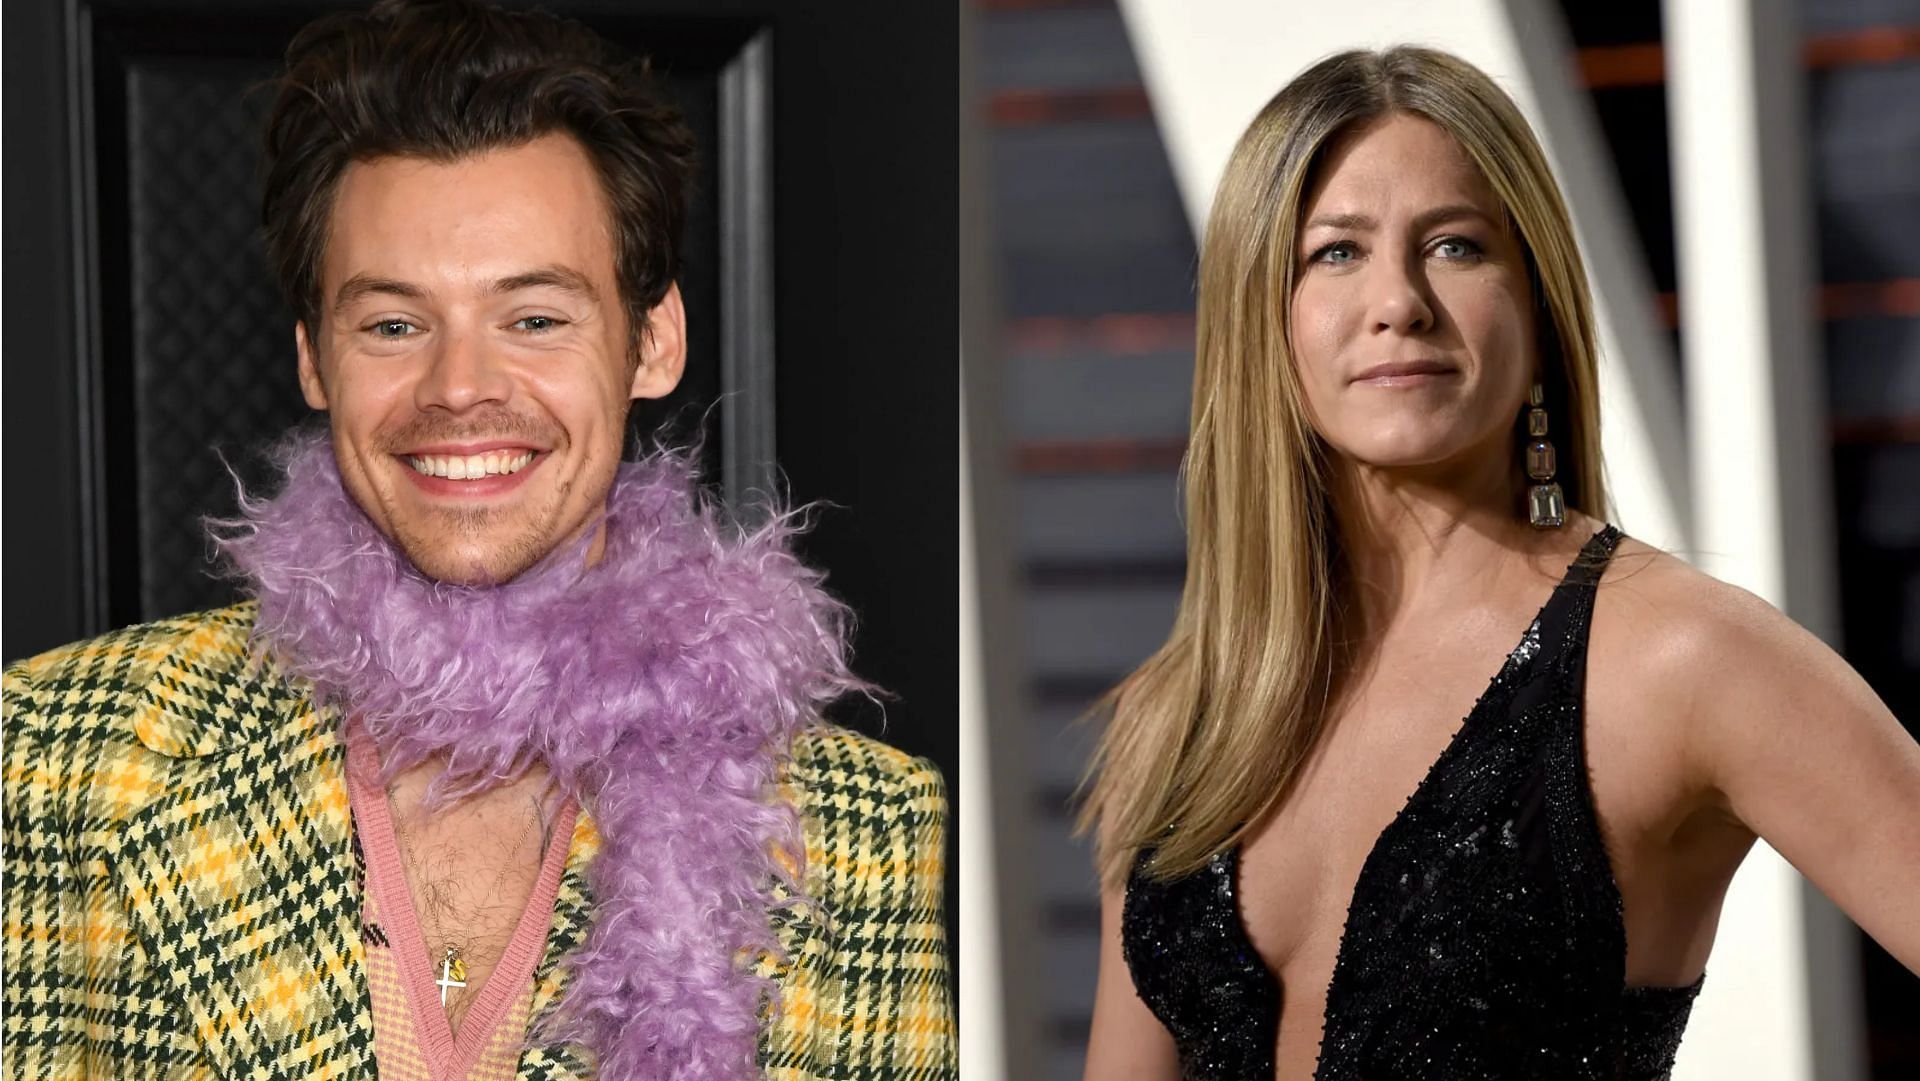 Harry Styles rips his pants apart mid-performance on stage in front of Jennifer Aniston. (Image via Shutterstock, Getty Images)